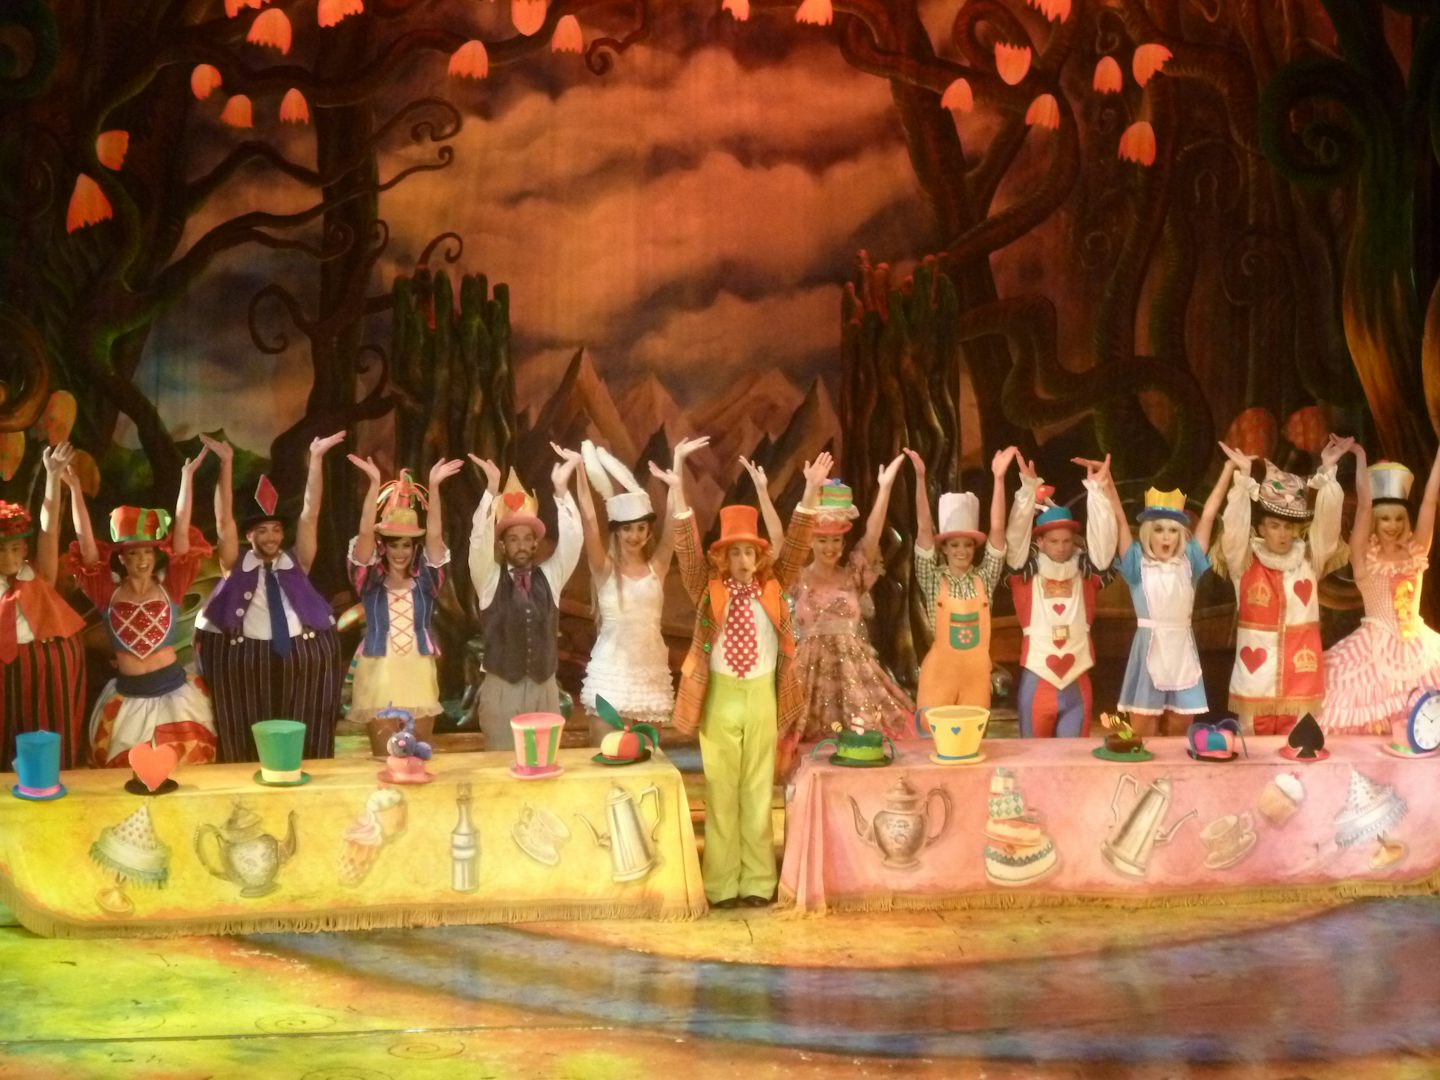 "Land of Make Believe" Production Show